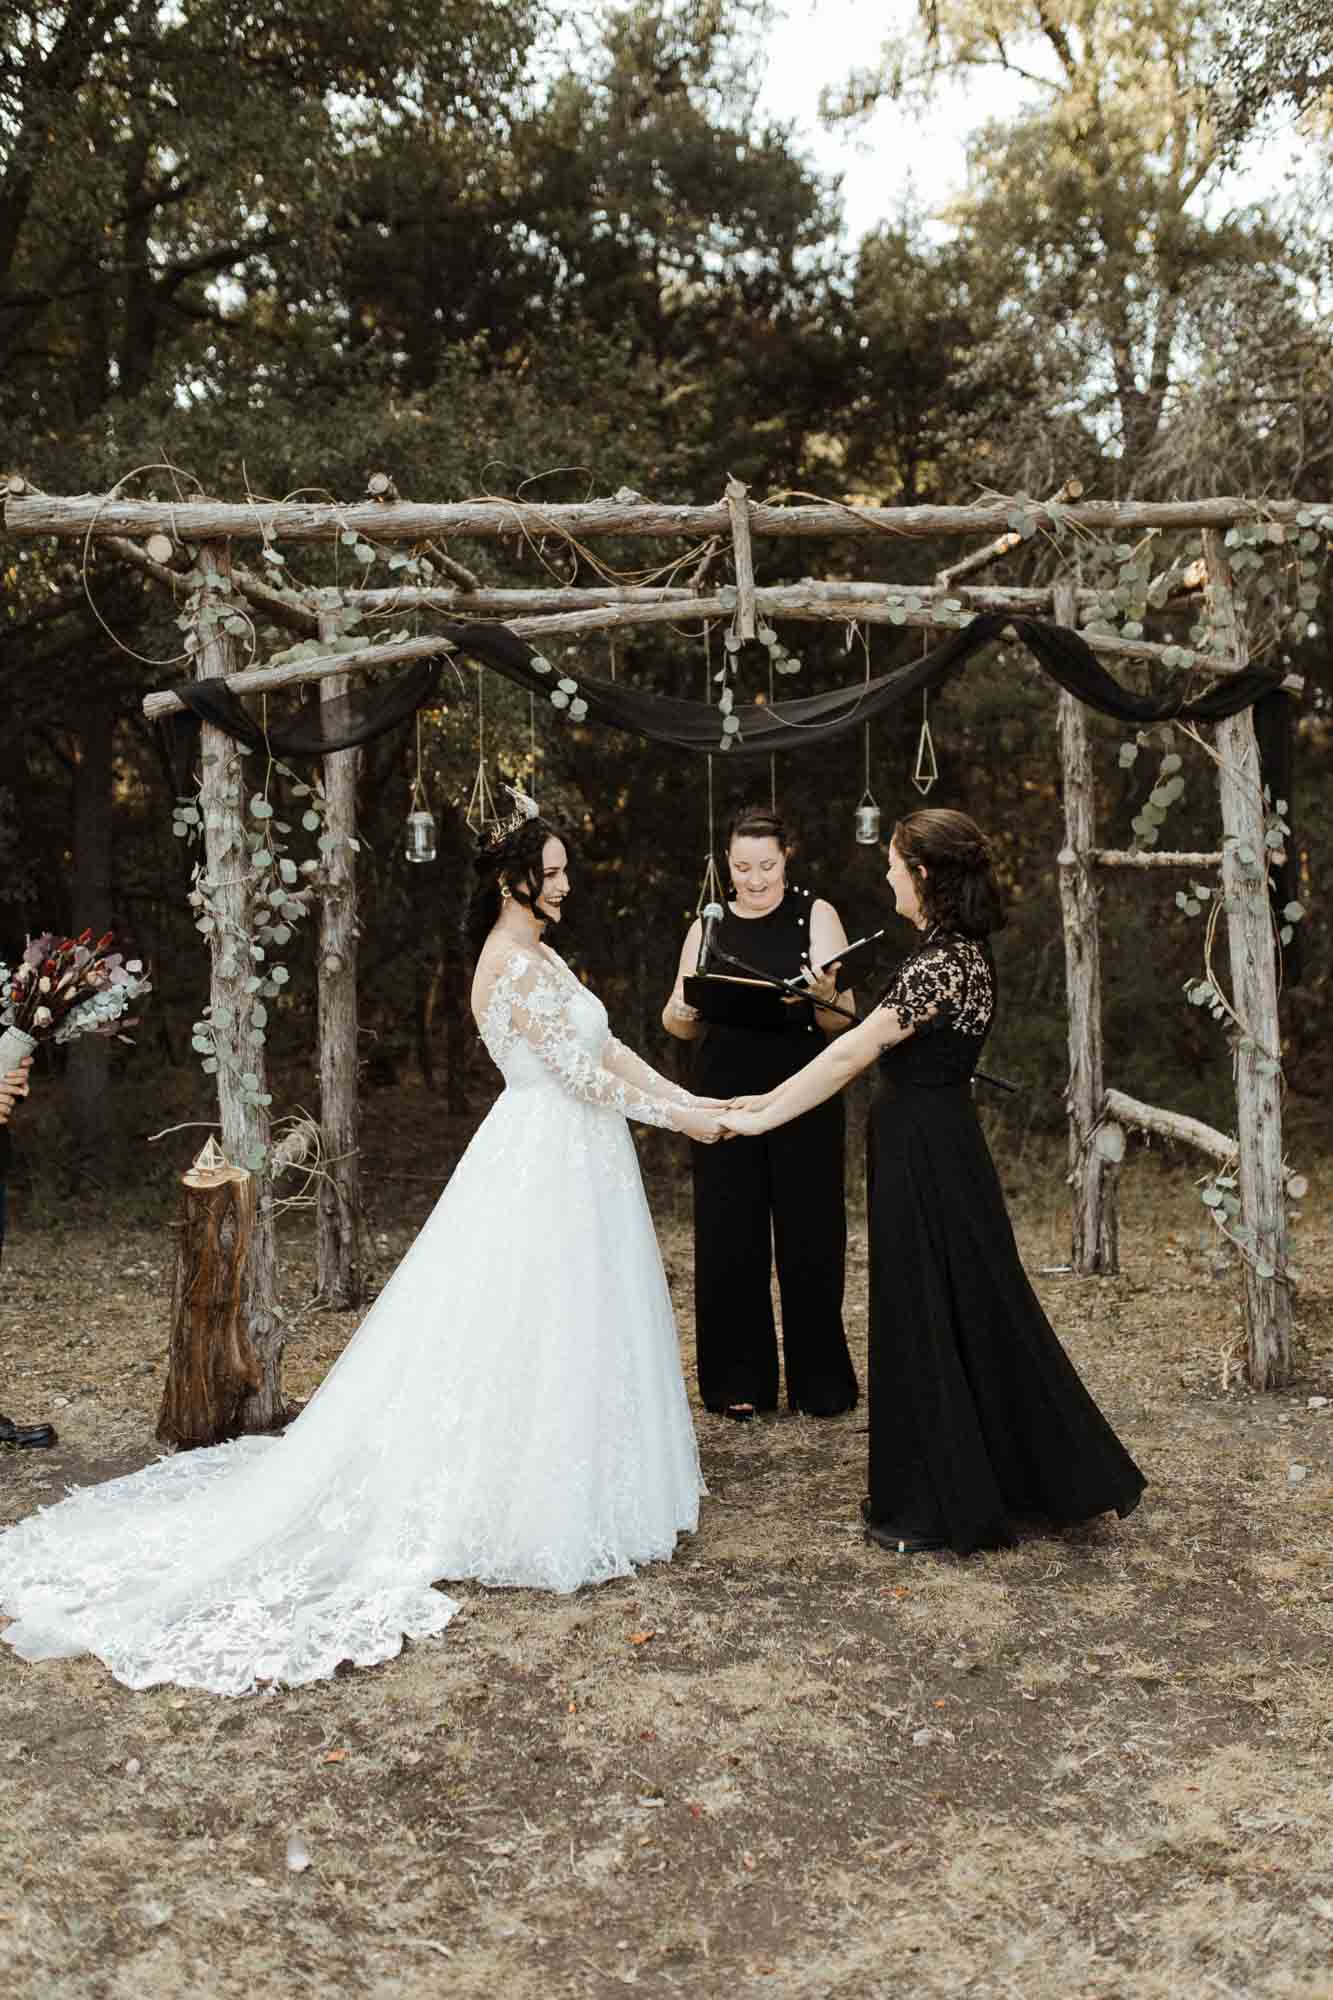 Beautifully gothic Texas wedding with creative details, photo by Leah Thomason Photography, featured on Equally Wed, the LGBTQ+ wedding magazine